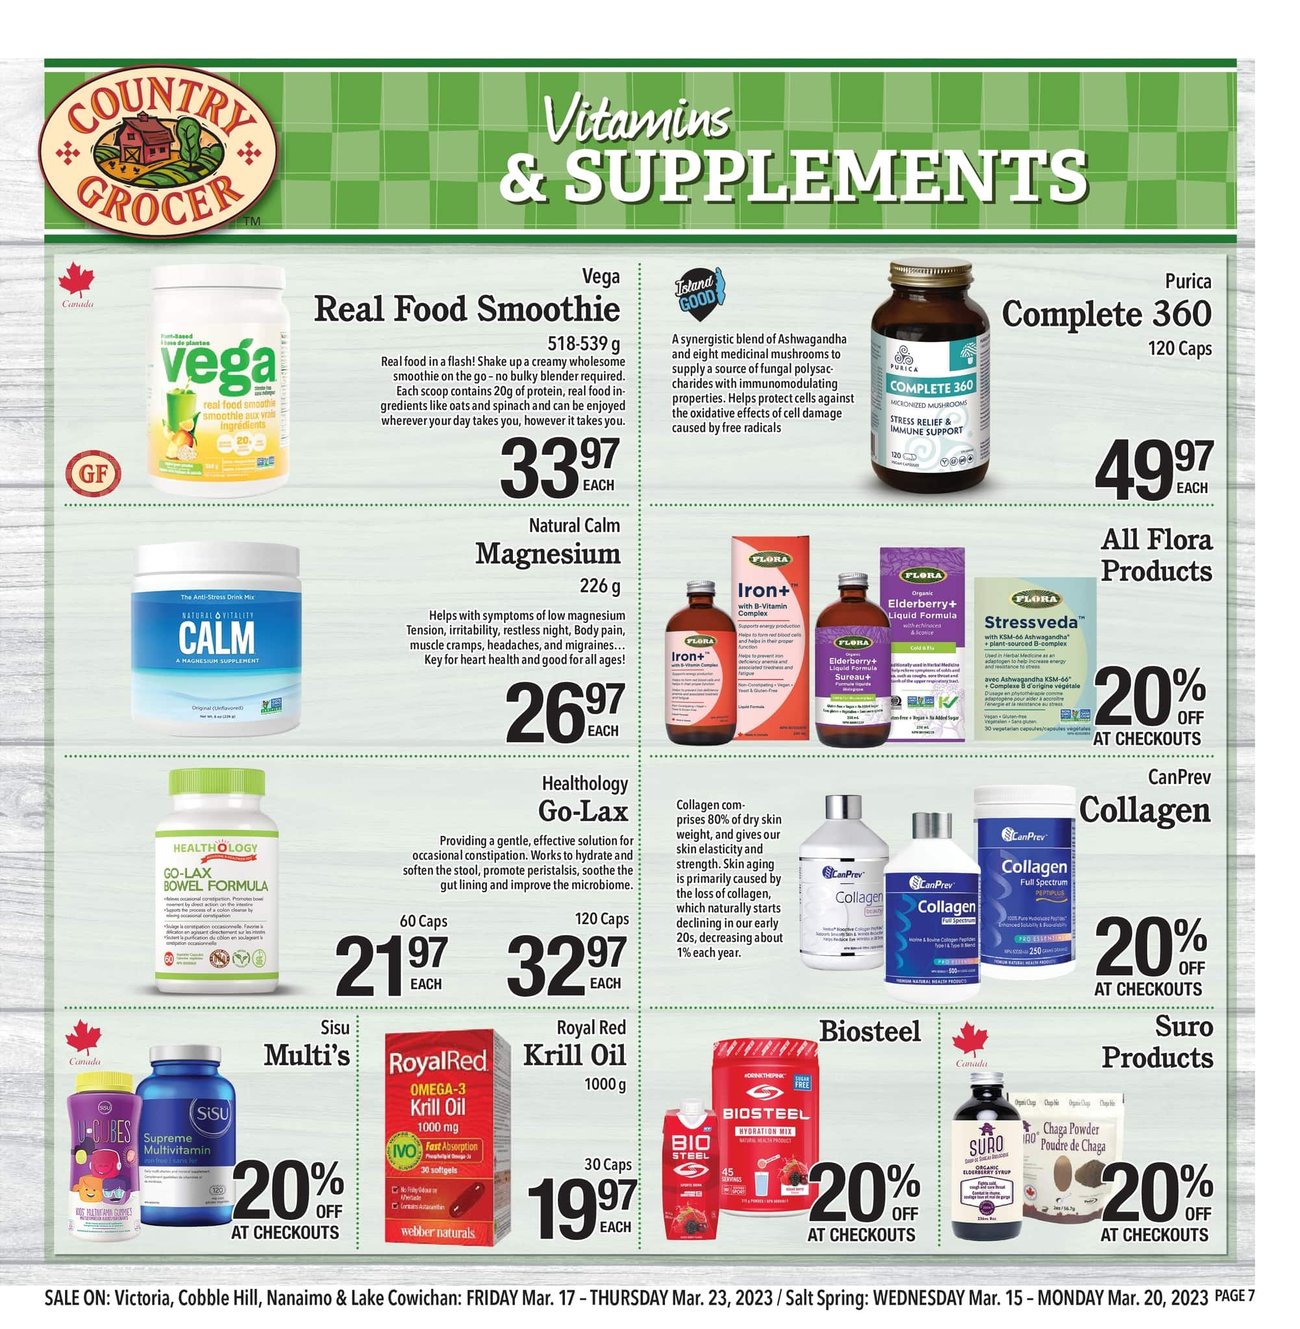 Country Grocer - Weekly Flyer Specials - Page 7